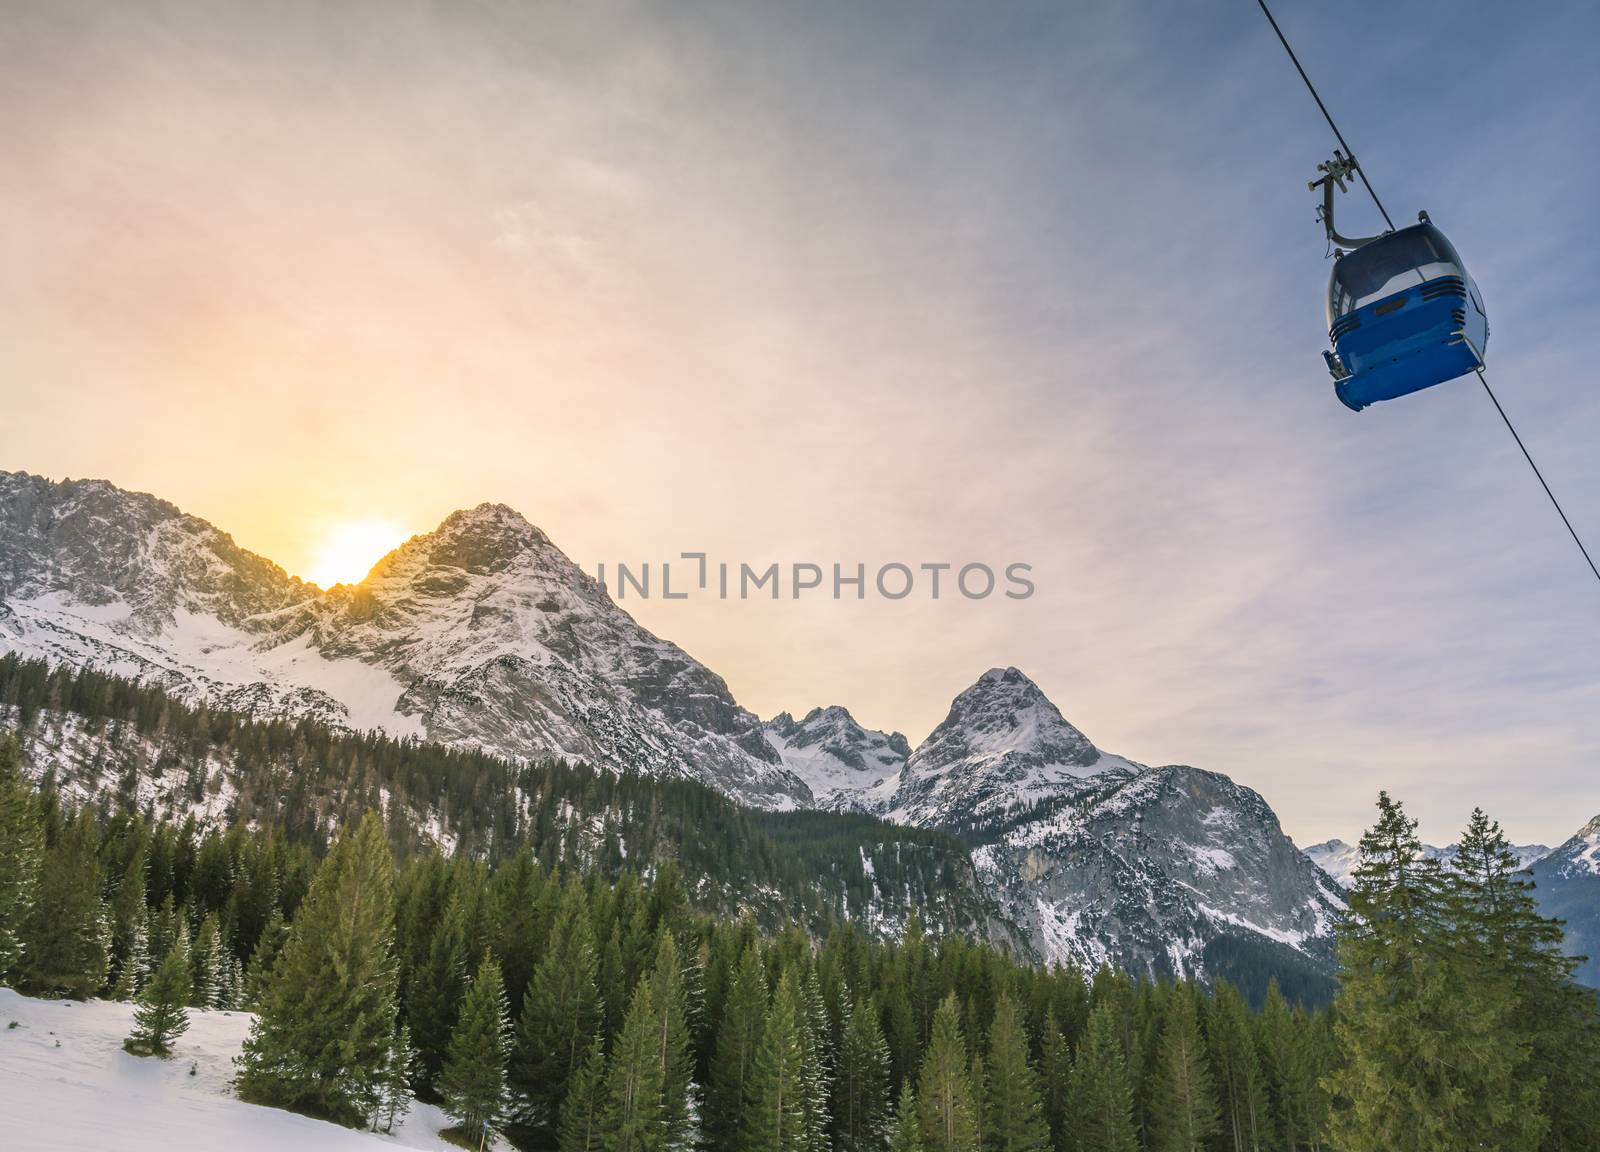 Winter landscape with evergreen fir forests, the Austrian Alps mountains and a cable car, in Ehrwald municipality, Austria.